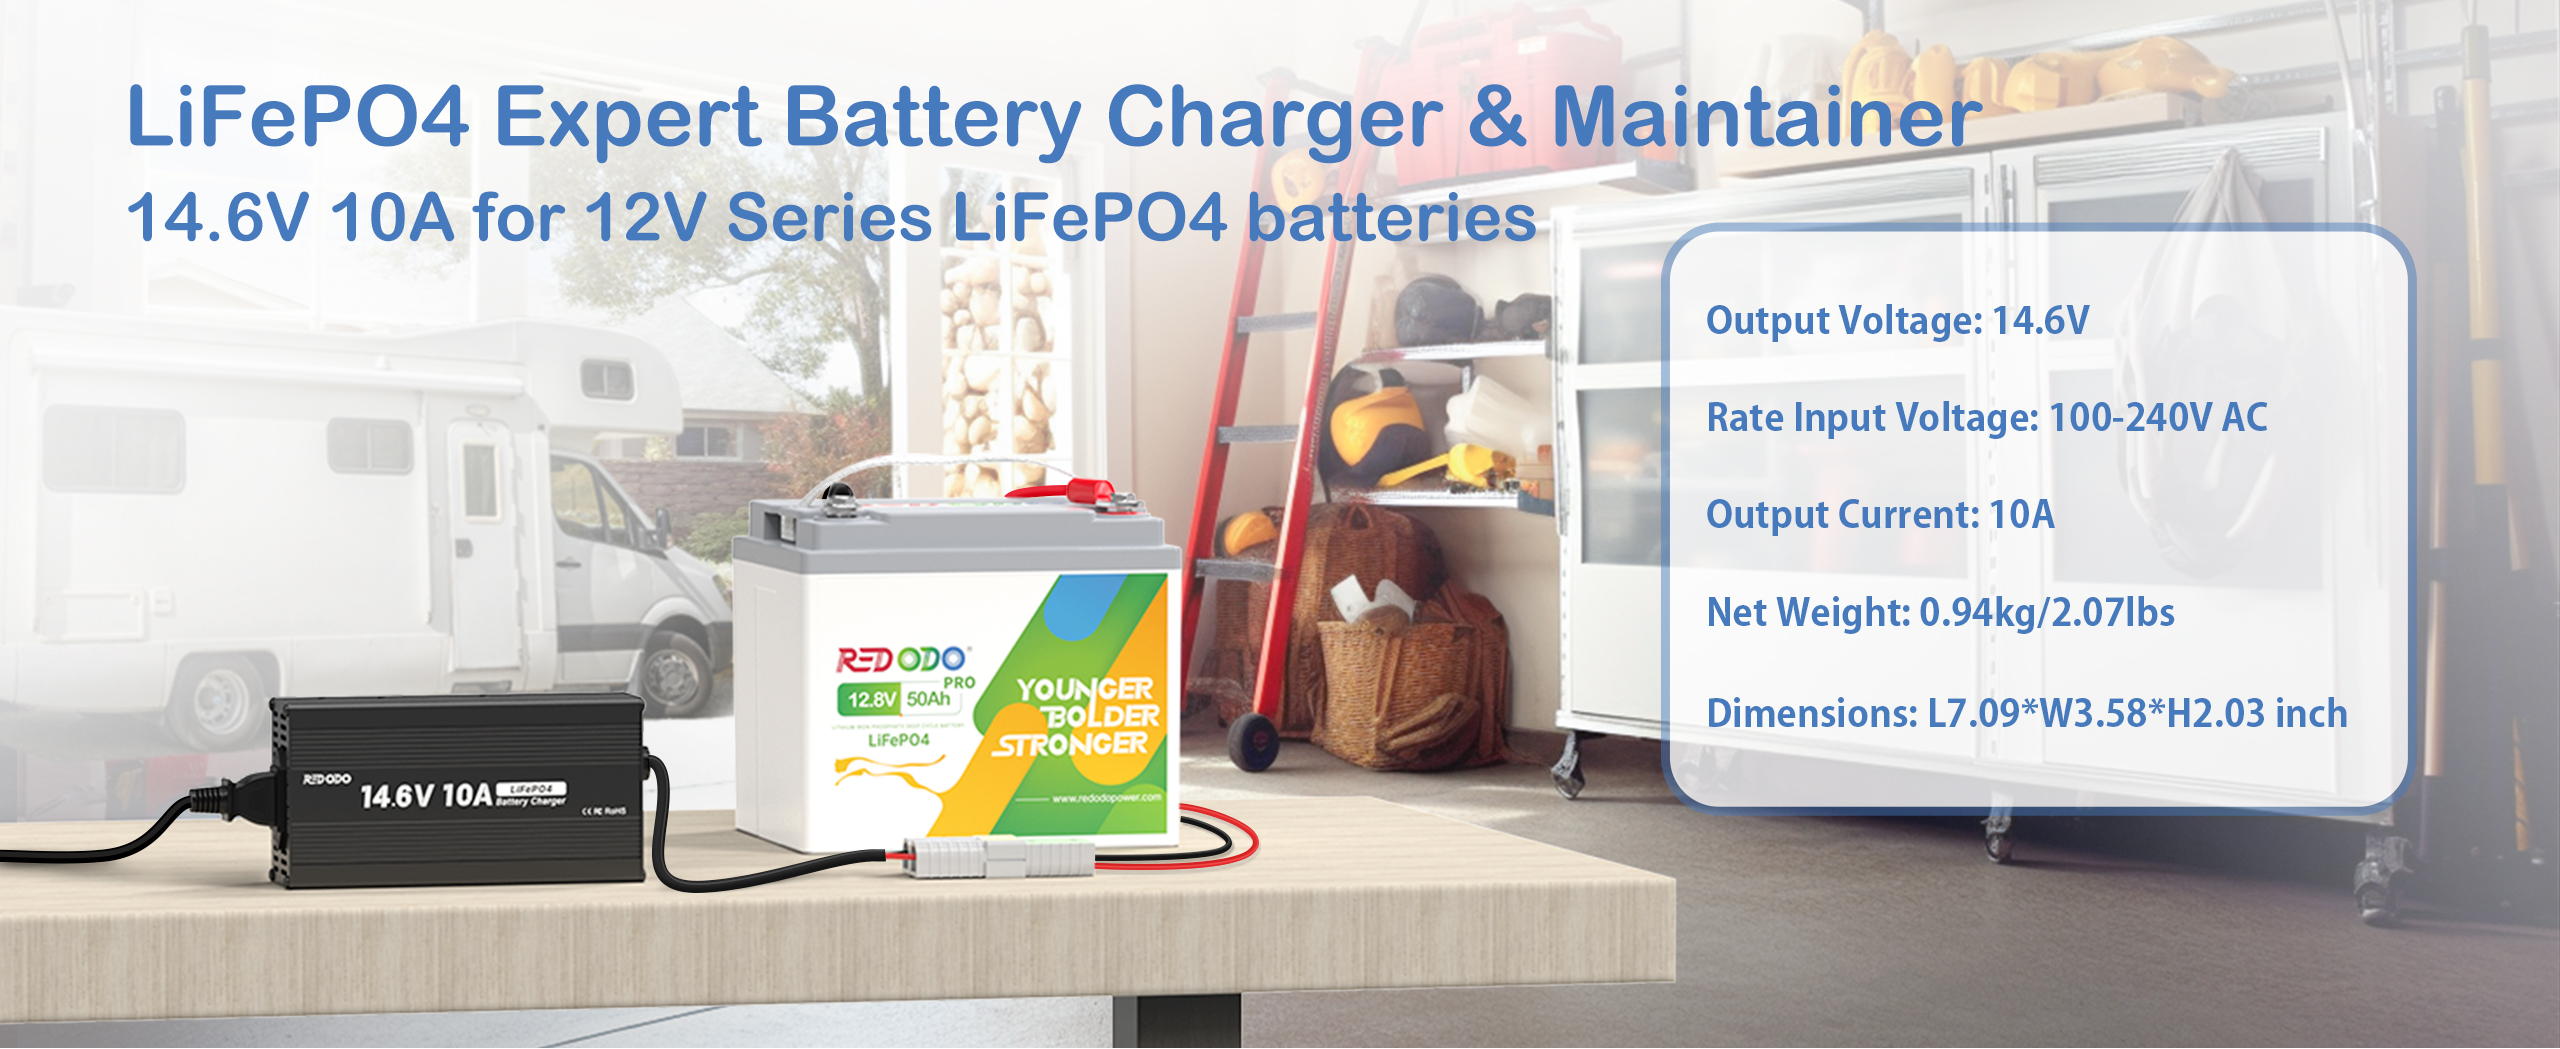 Redodo 14.6V 10A chargers for lithium lifepo4 batteries